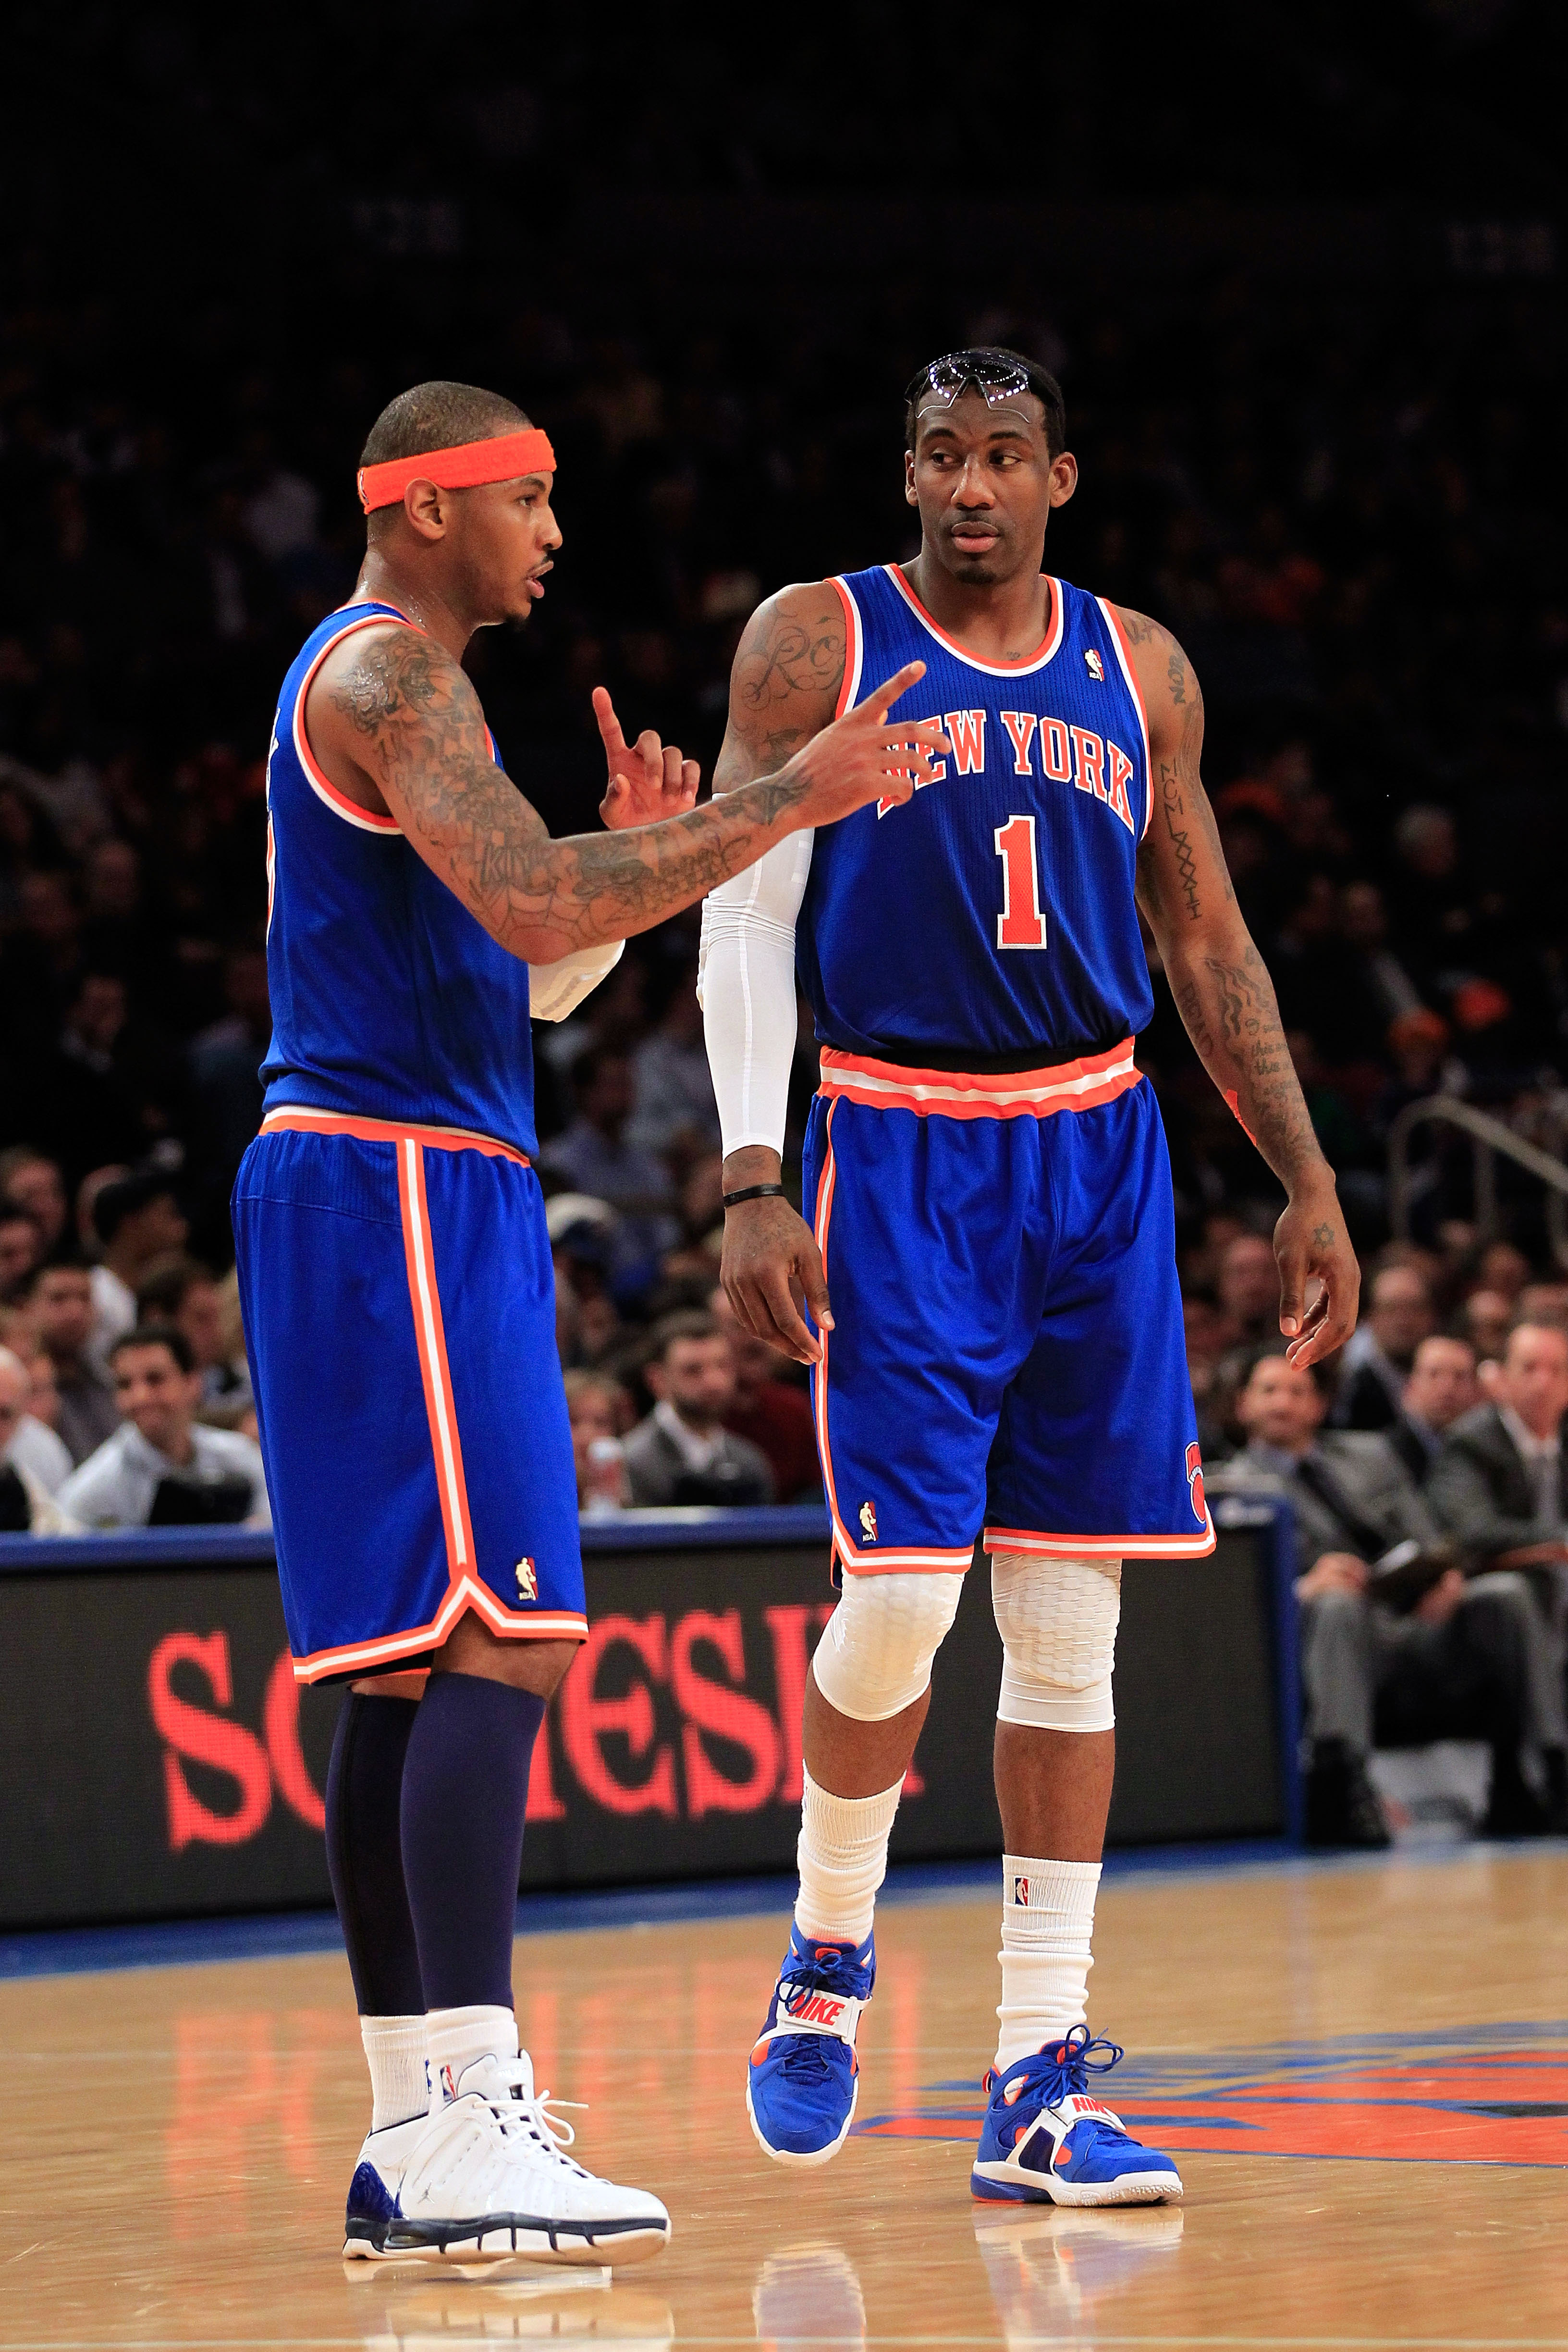 NEW YORK, NY - FEBRUARY 23: (L-R) Carmelo Anthony #7 and Amar'e Stoudemire #1 of the New York Knicks discuss tactics on the court against the Milwaukee Bucks at Madison Square Garden on February 23, 2011 in New York City. NOTE TO USER: User expressly ackn